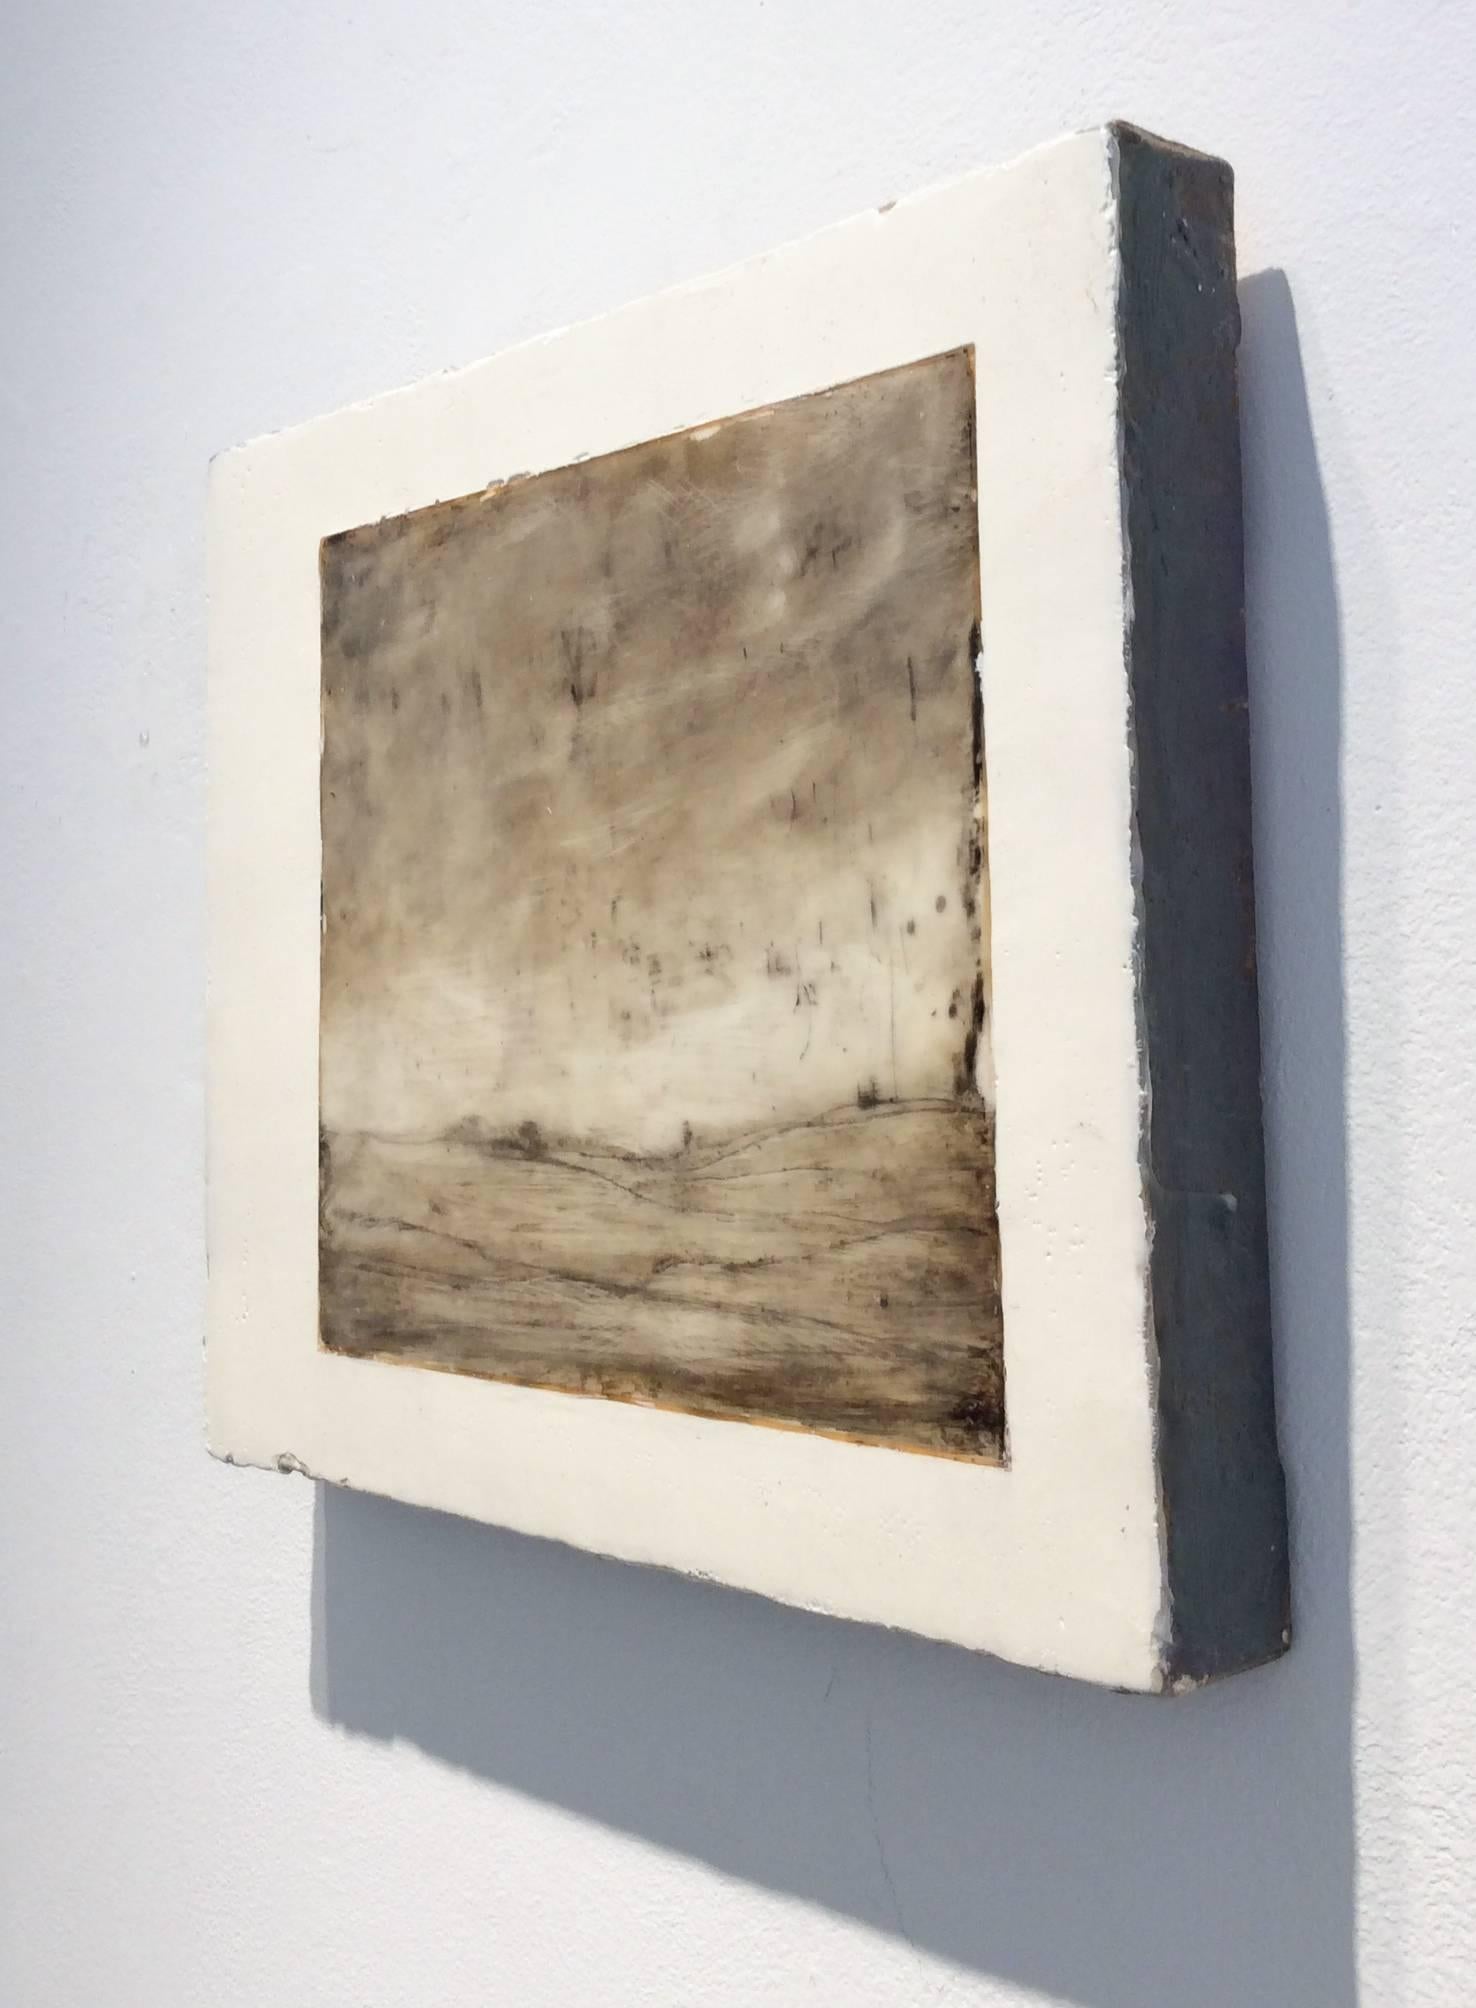 Opening Farm (Encaustic Monochromatic Pastoral Landscape in Earth Tones & White) - Contemporary Mixed Media Art by Leigh Palmer